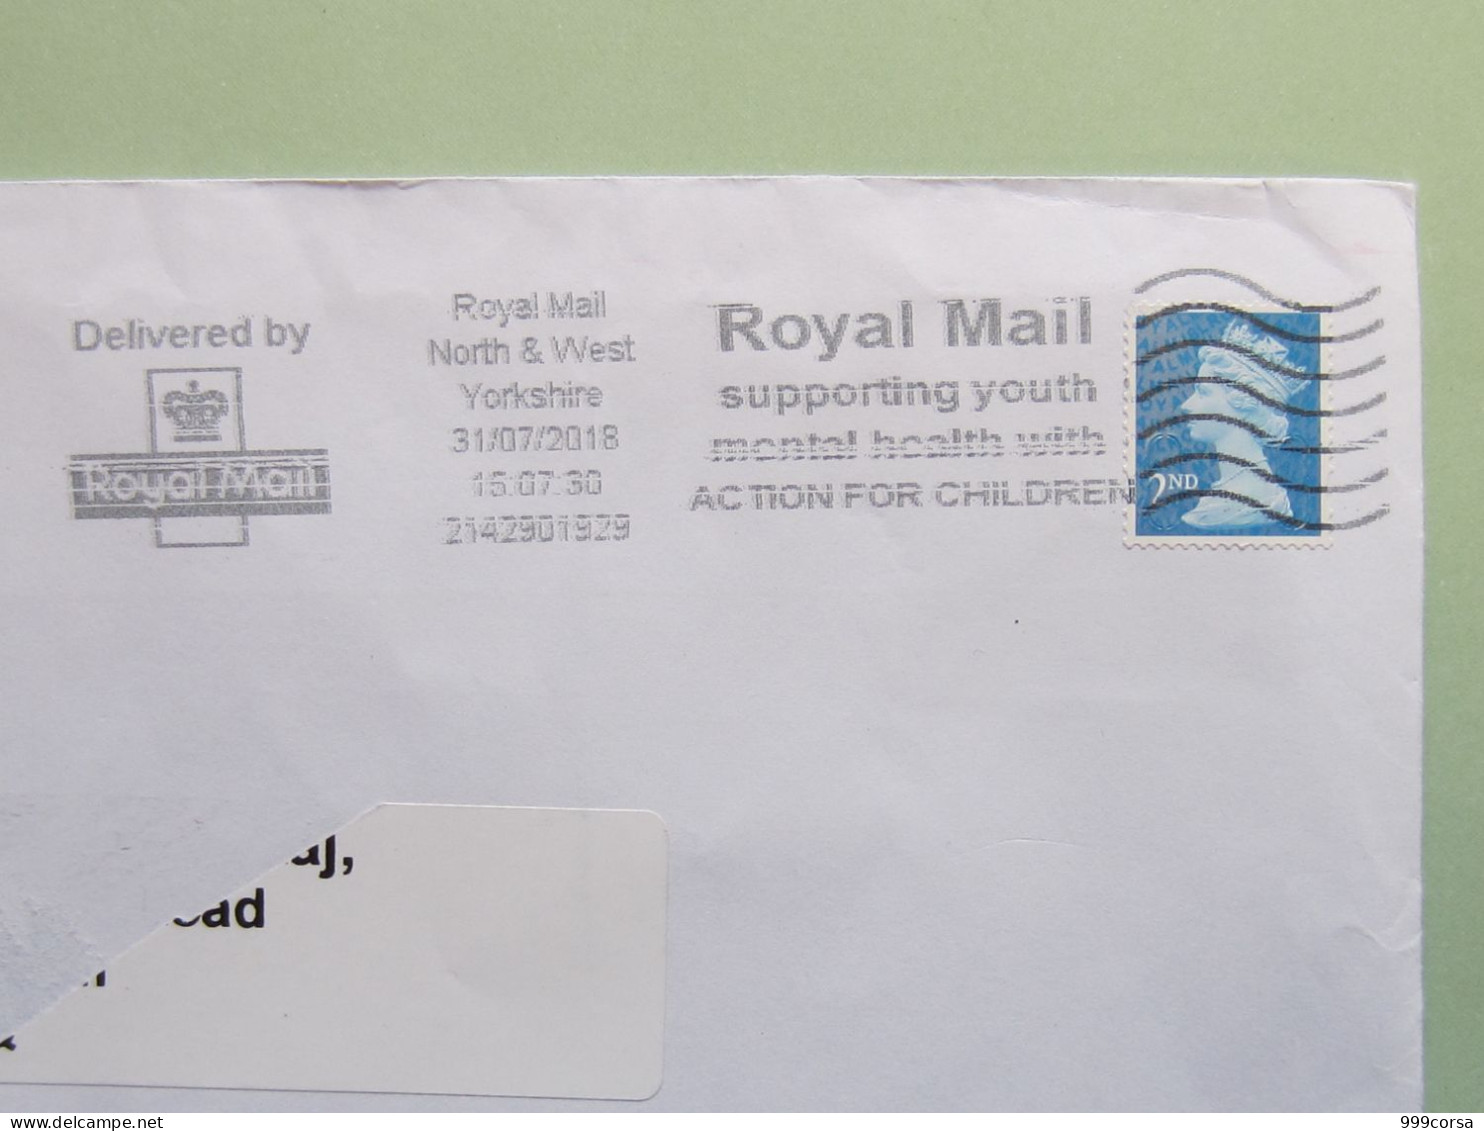 GB, Salute, Royal Mail Sostiene Salute Mentale Giovani Con Action For Children (busta 24x16) - Disease